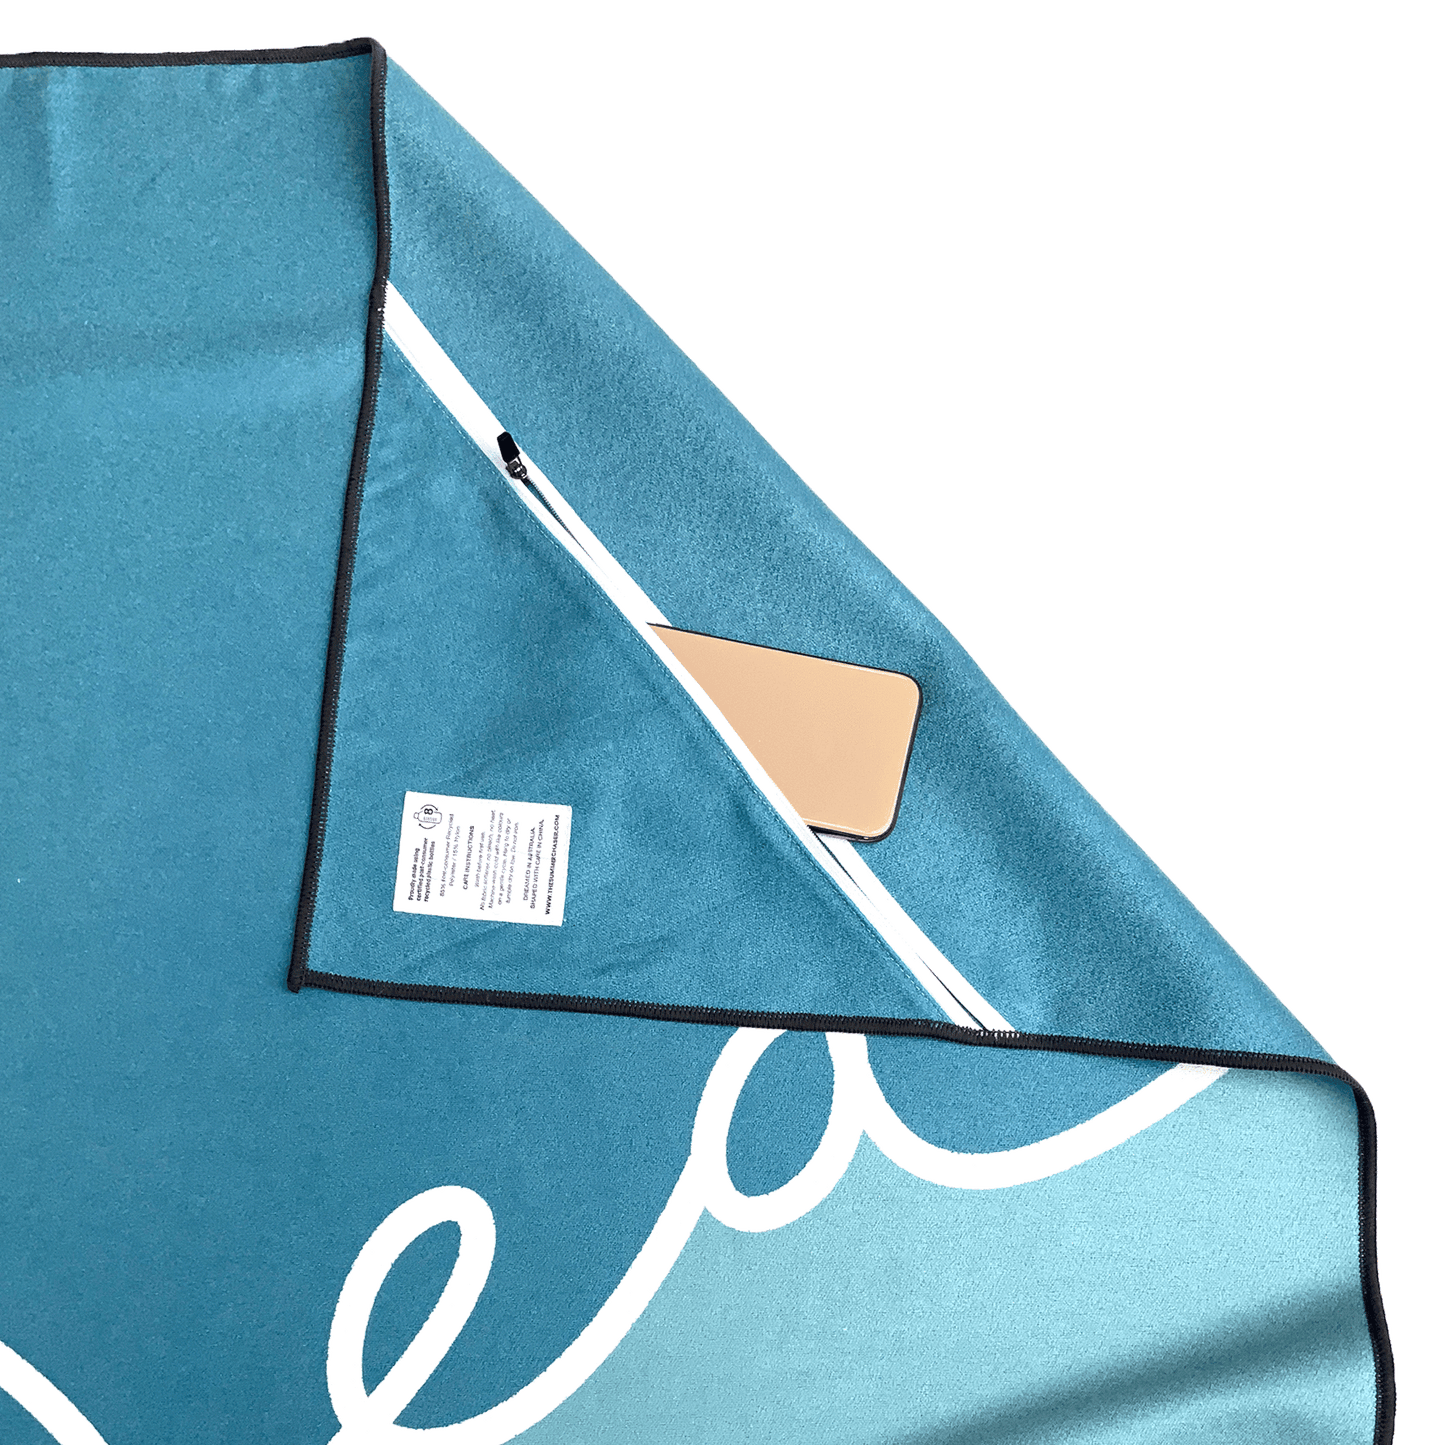 Practical zip corner pocket on The Summer Chaser beach towels to stash valuables. Sea Lover design in blue colour by The Summer Chaser